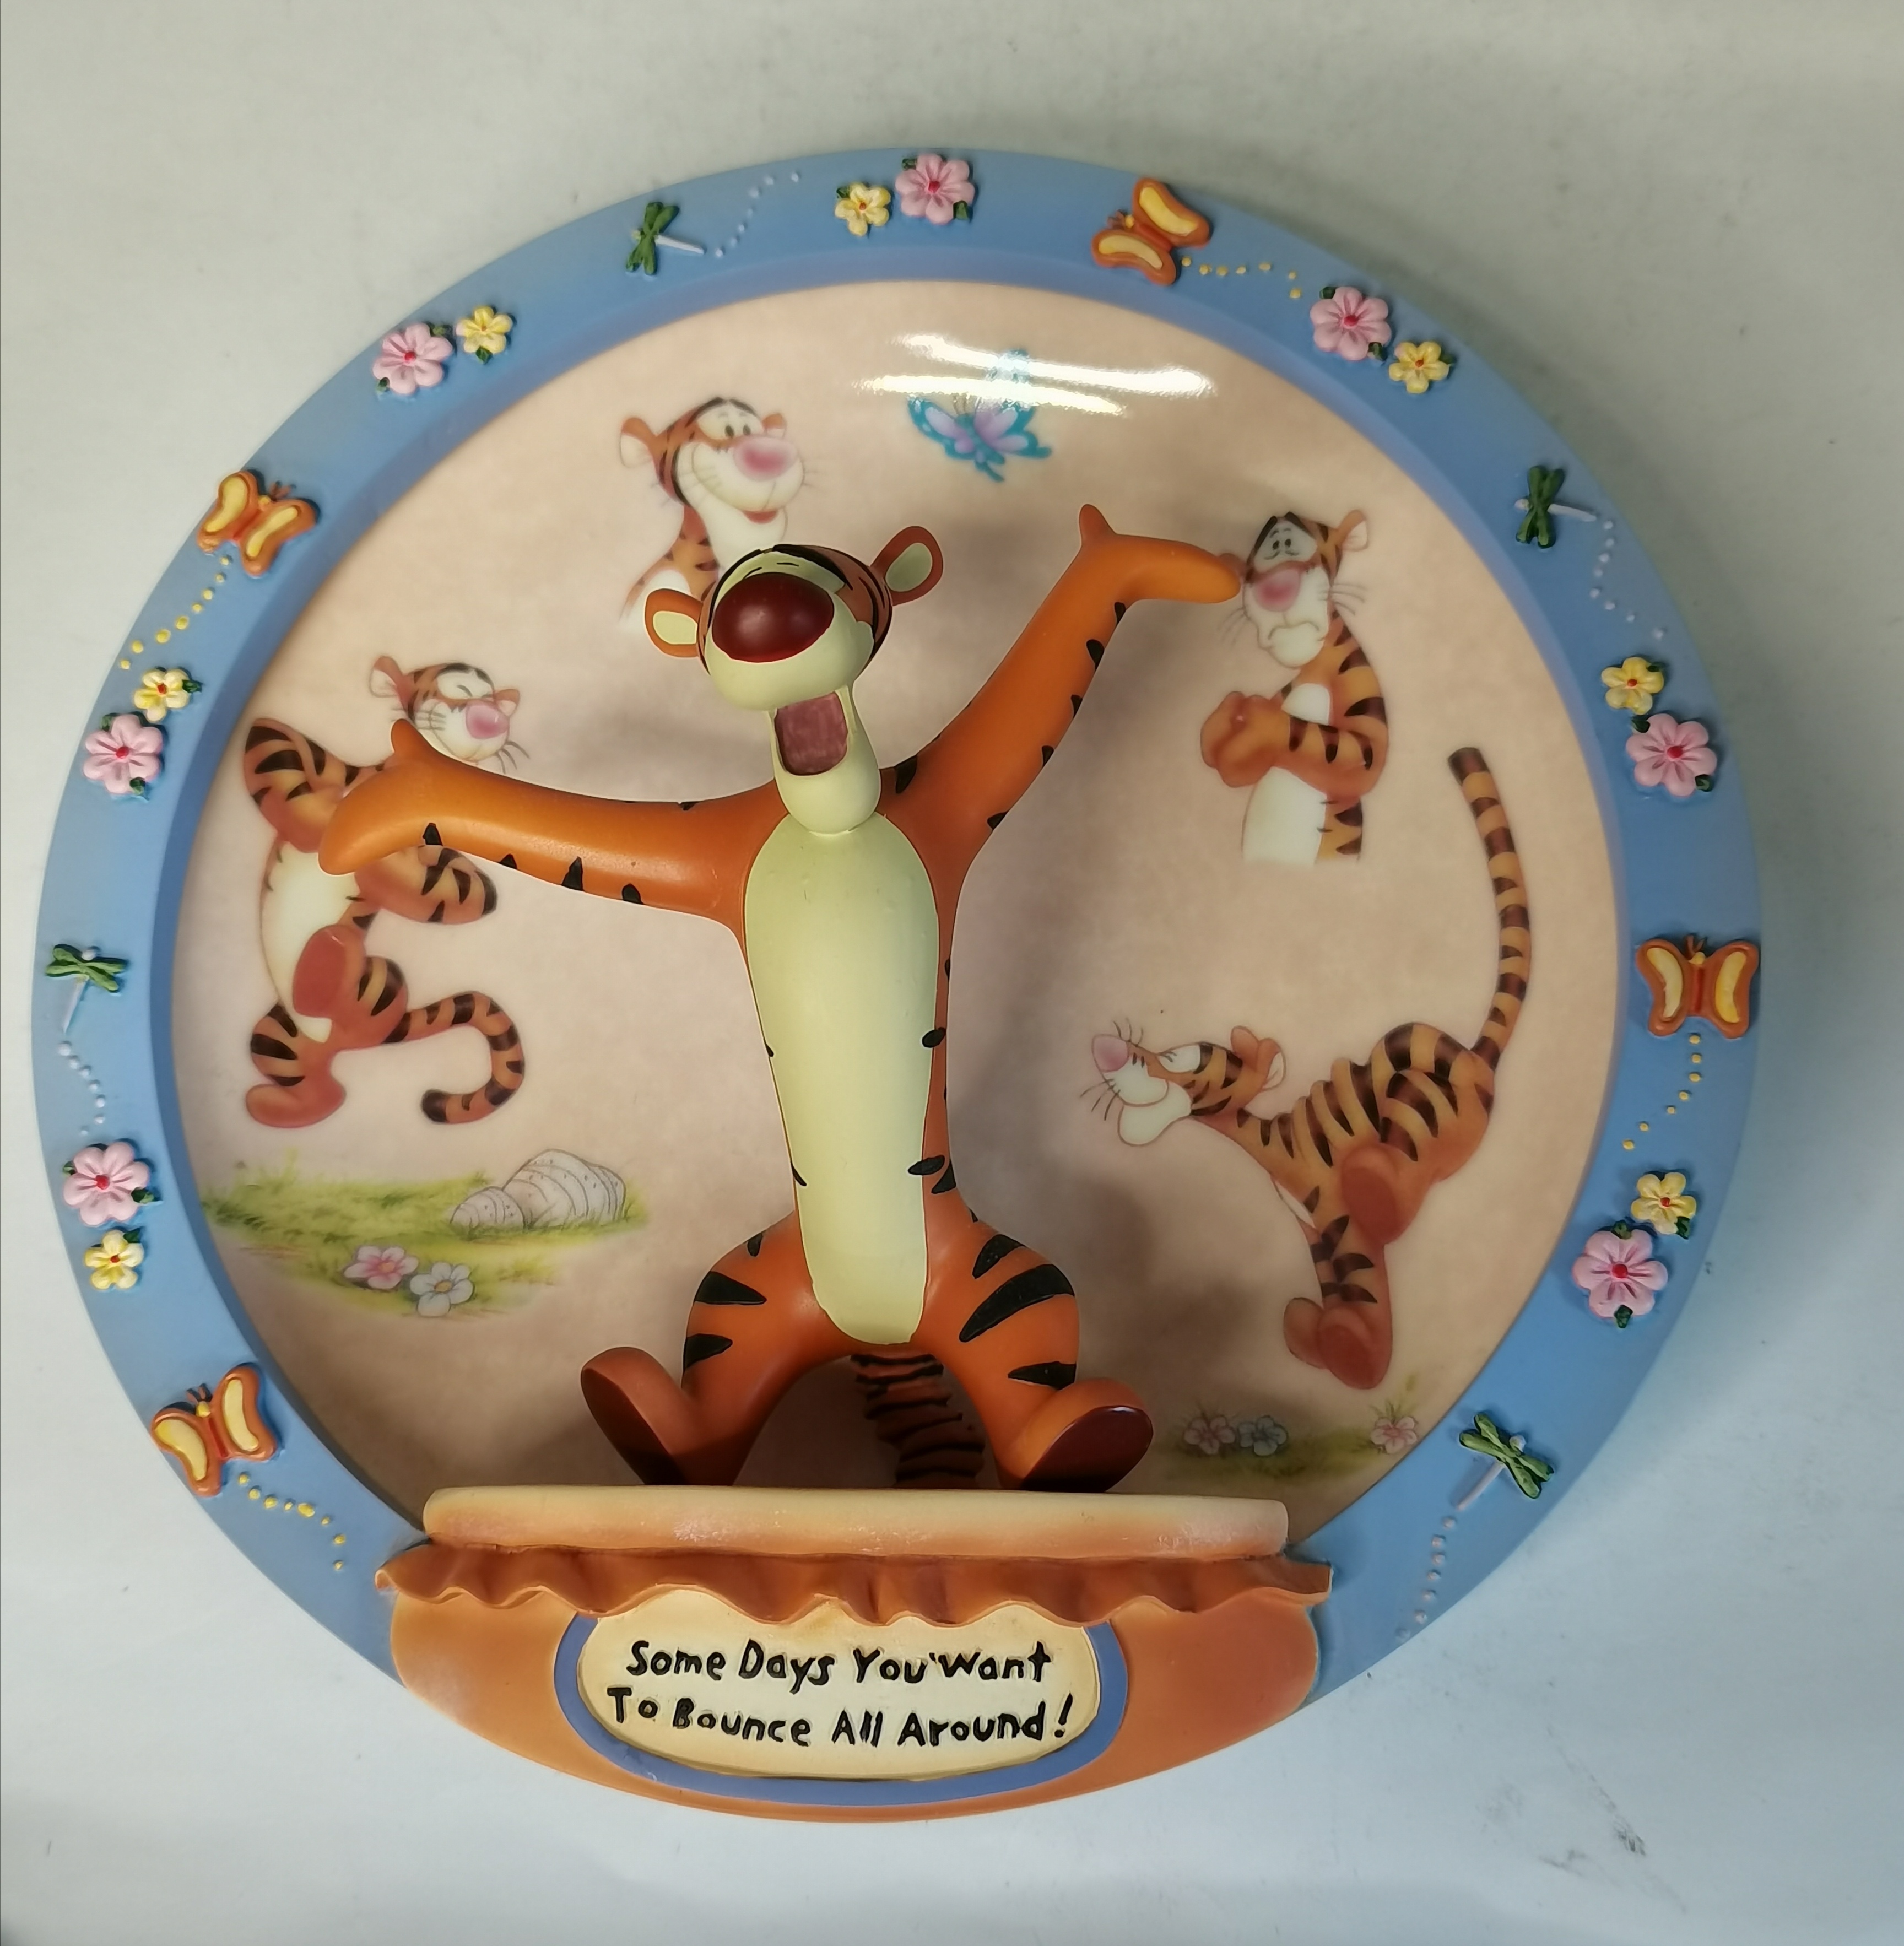 x5 Limited Edition Disney Plates with certificates and boxes - Image 3 of 8